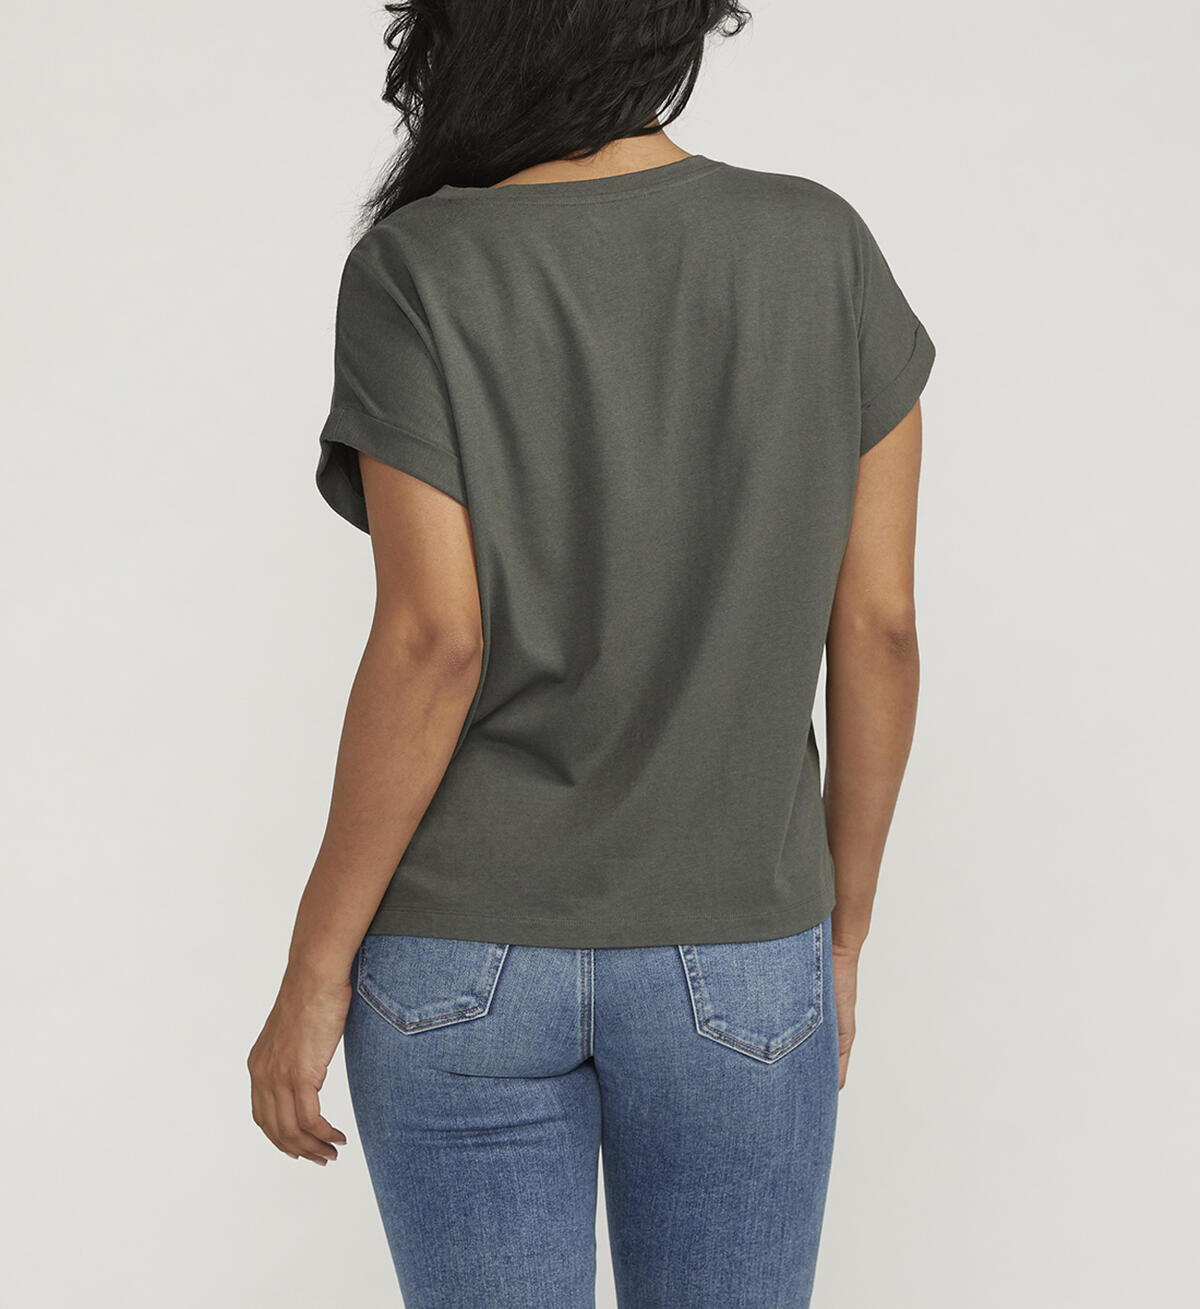 Drapey Luxe Tee, Olive, hi-res image number 1